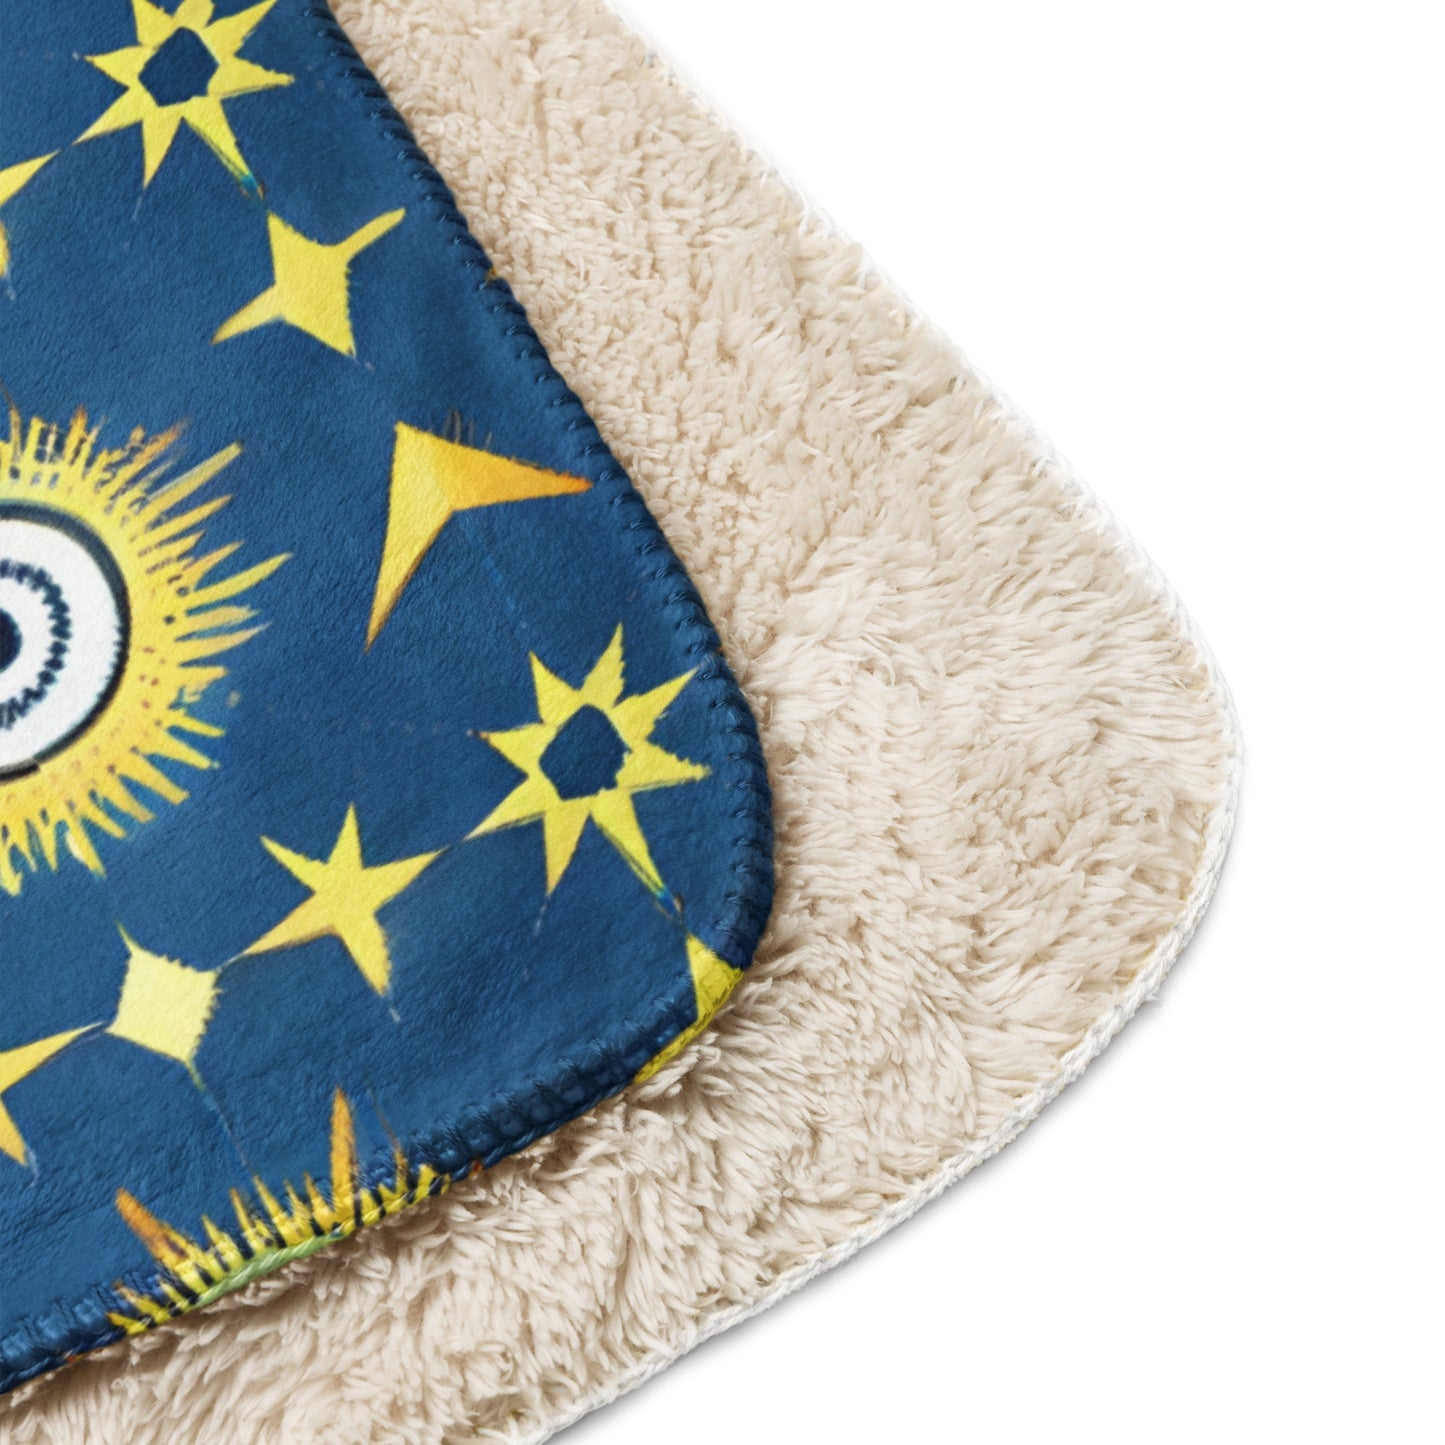 Navy & Gold Star Sherpa Blanket - Luxurious Comfort & Style